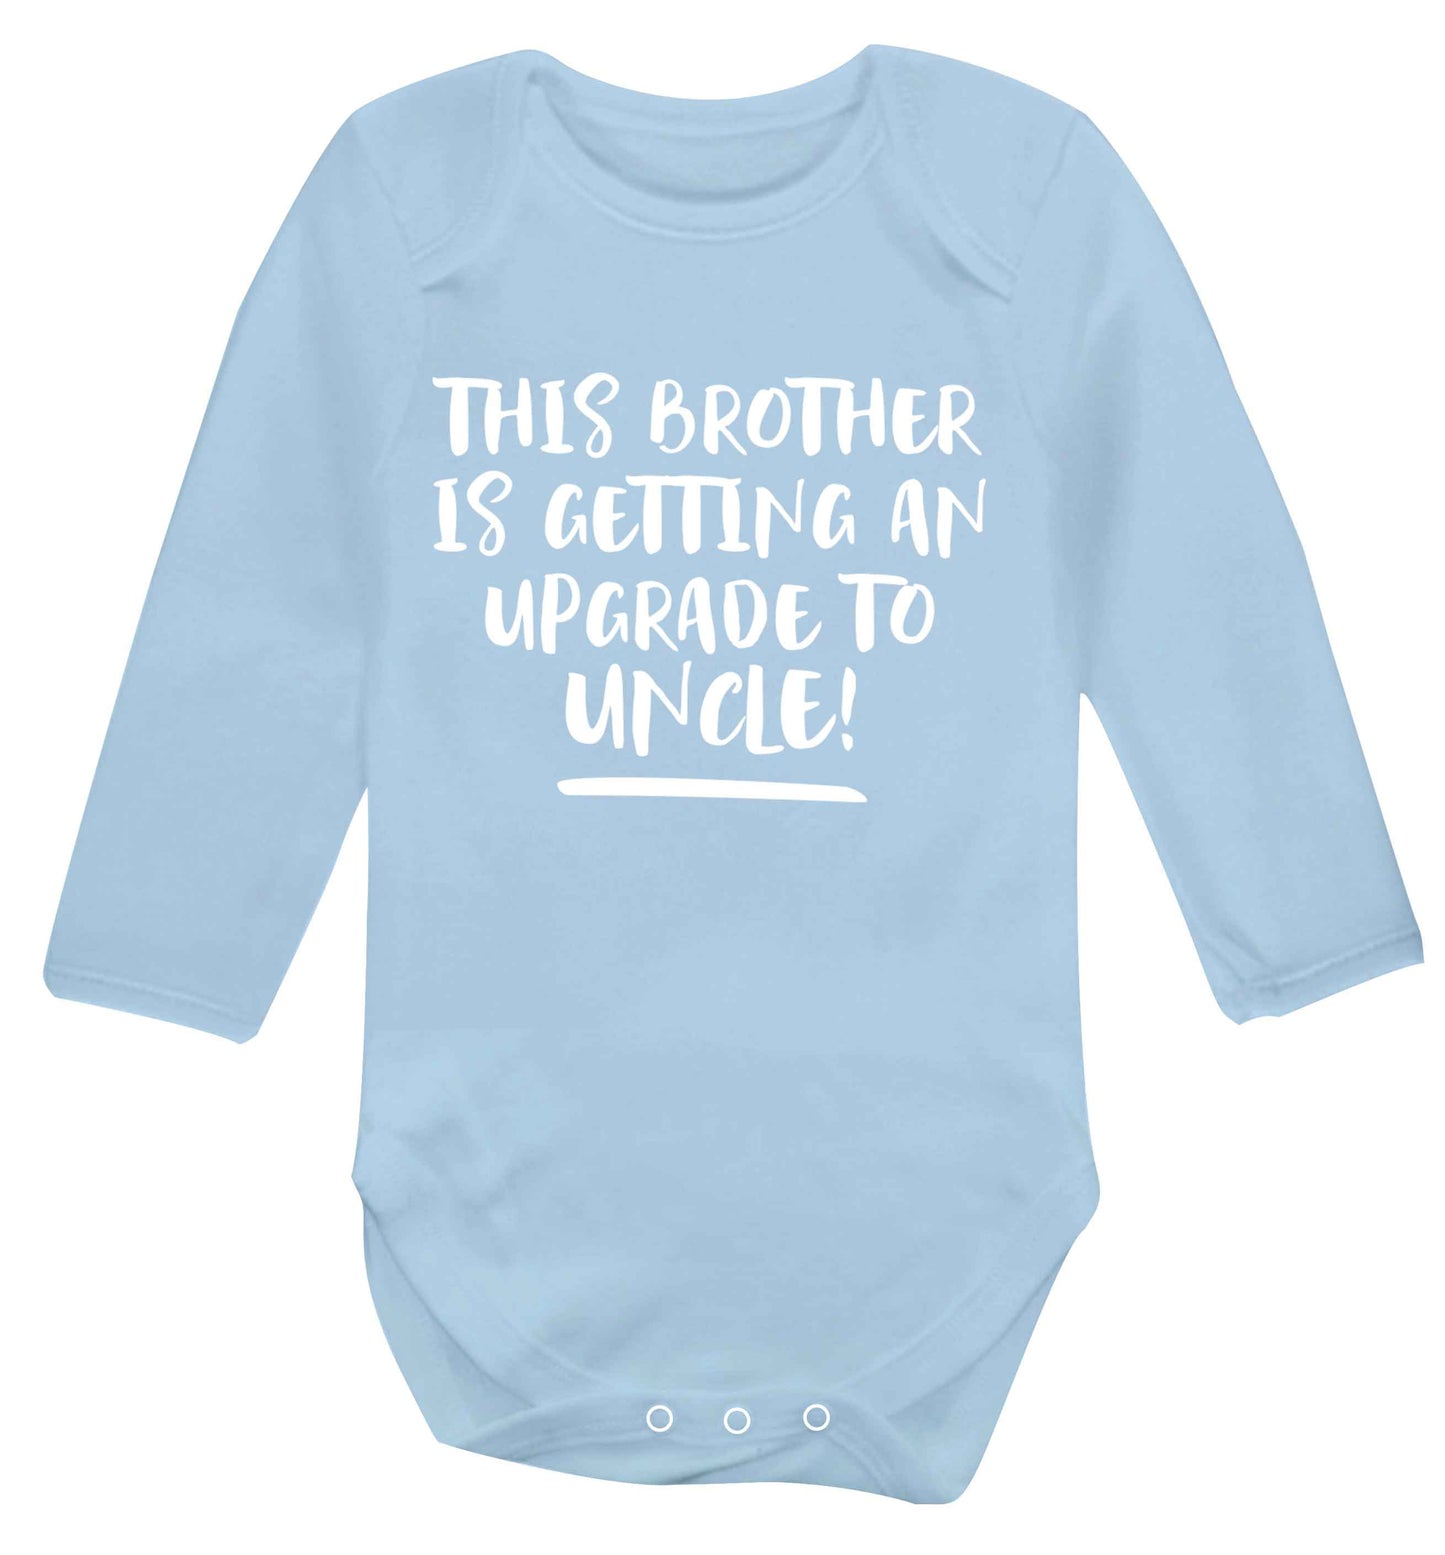 This brother is getting an upgrade to uncle! Baby Vest long sleeved pale blue 6-12 months